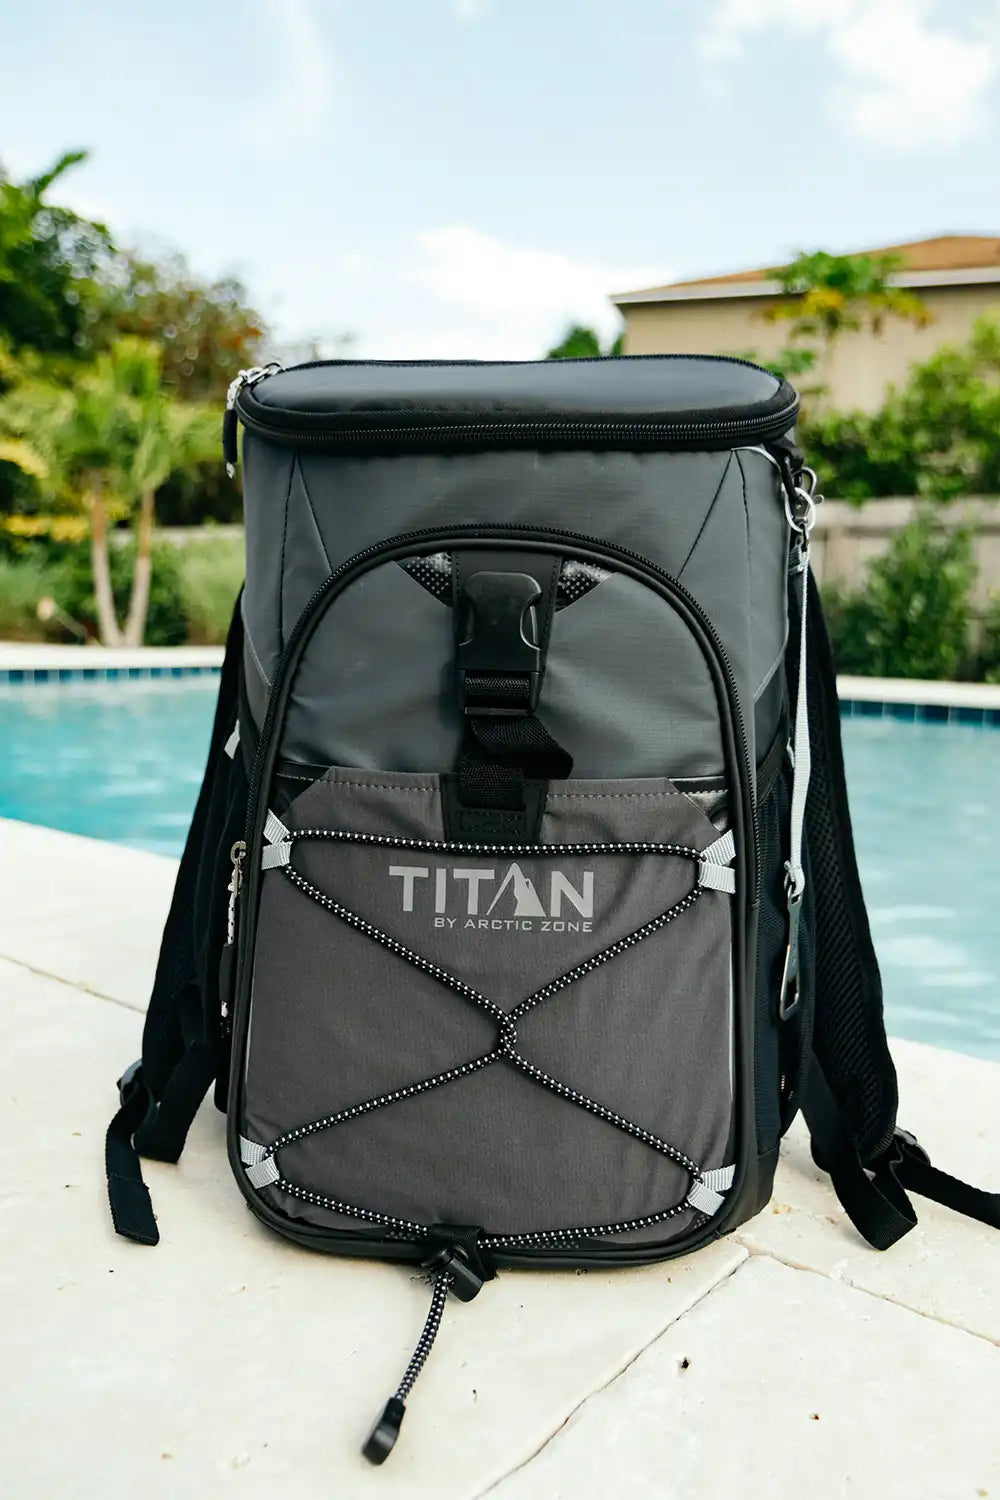 Backpack cooler outside next to a swimming pool